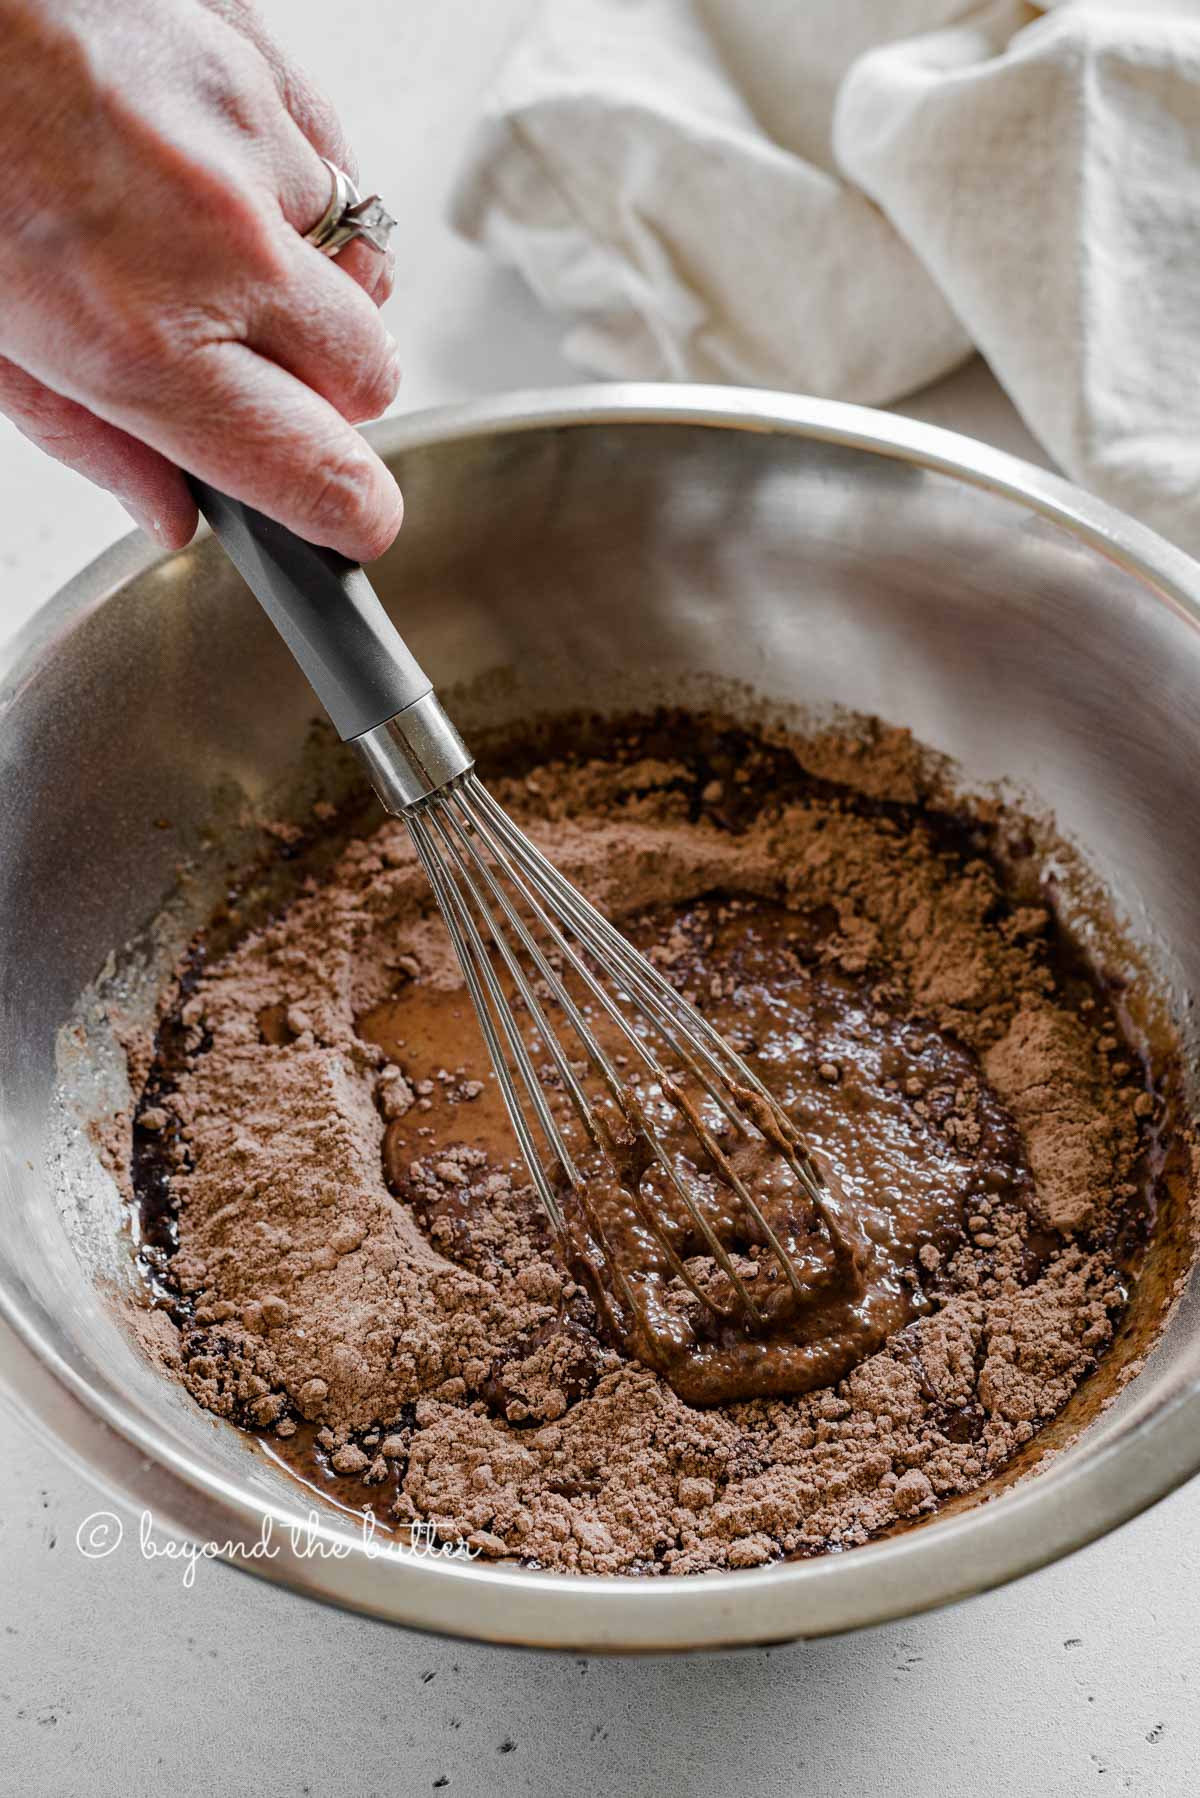 Process shot of making small batch chocolate cupcakes | All images © Beyond the Butter™